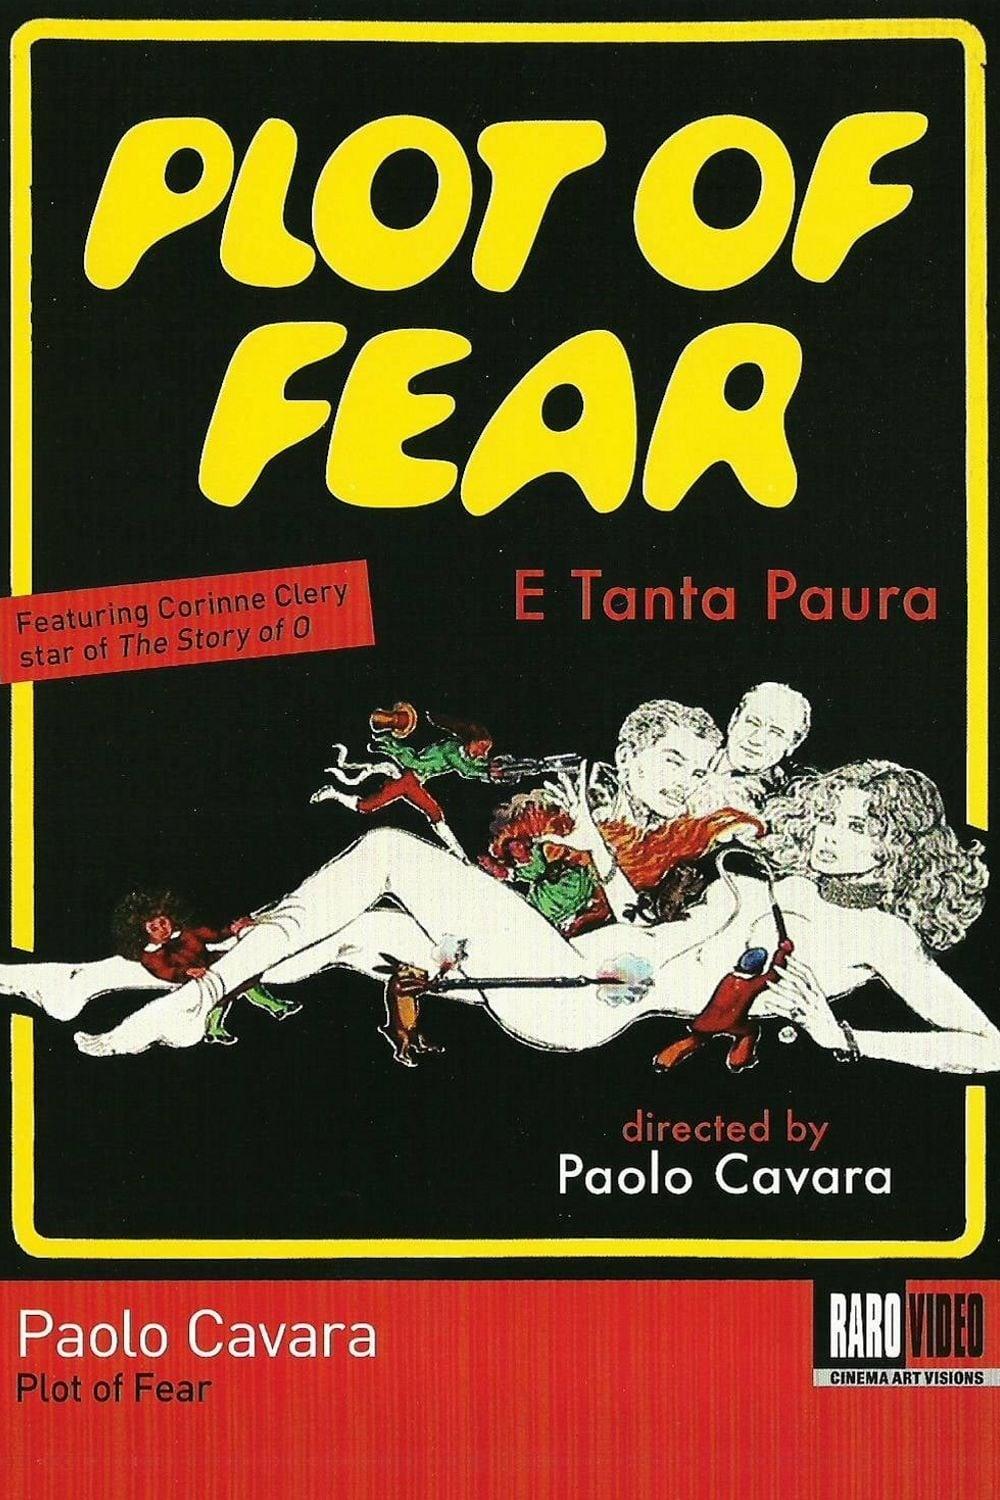 Plot of Fear poster